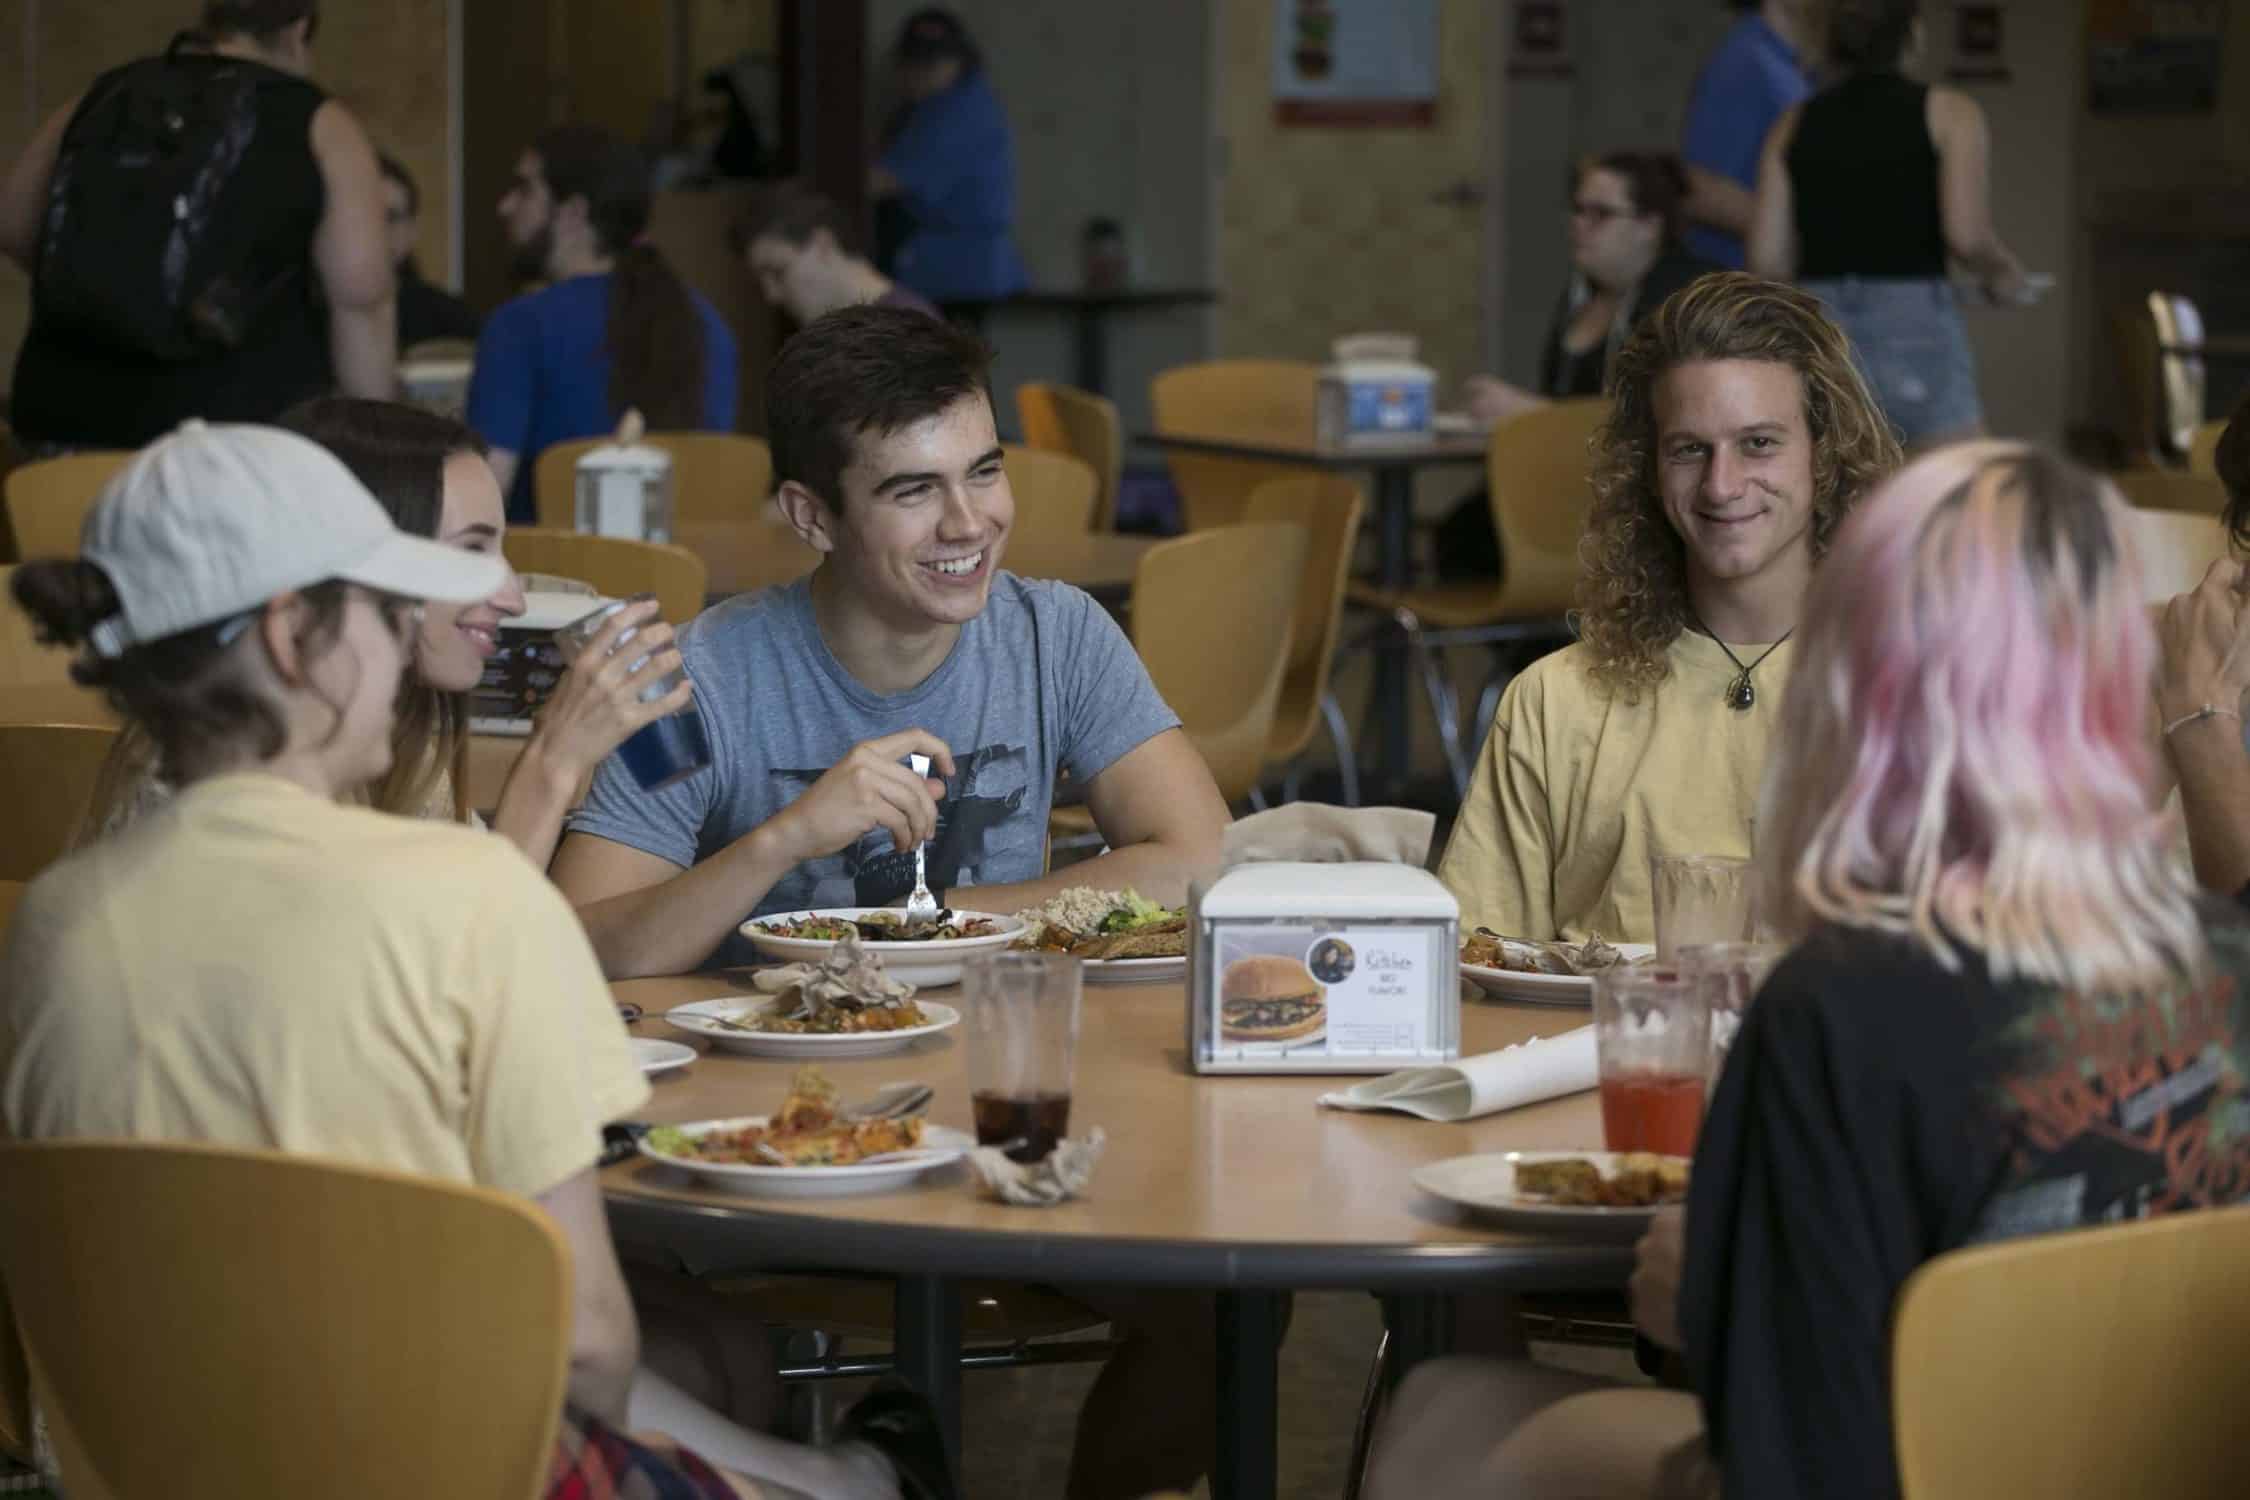 Students eat together in the dining hall